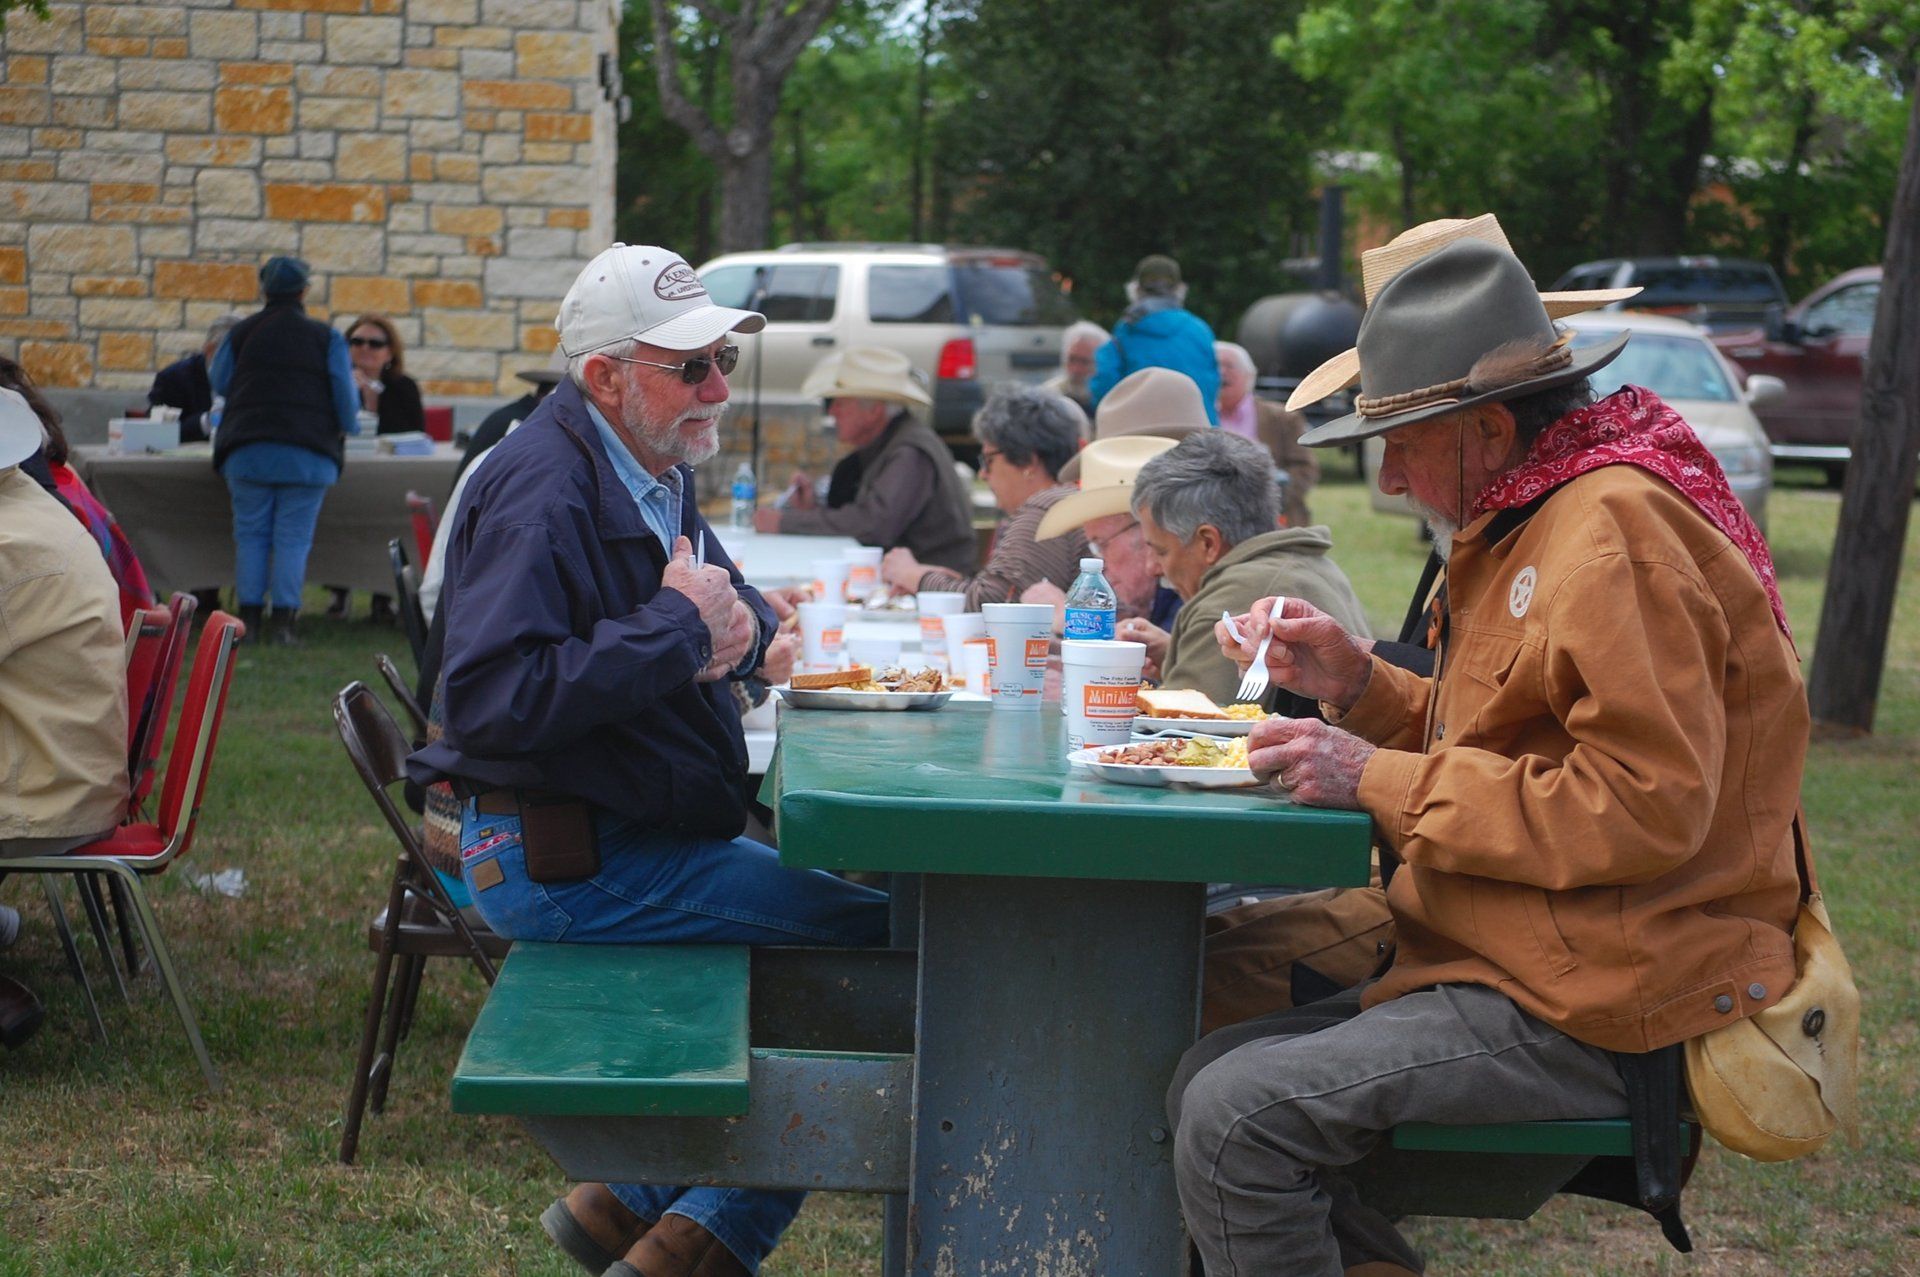 Men eating barbque at table in the park